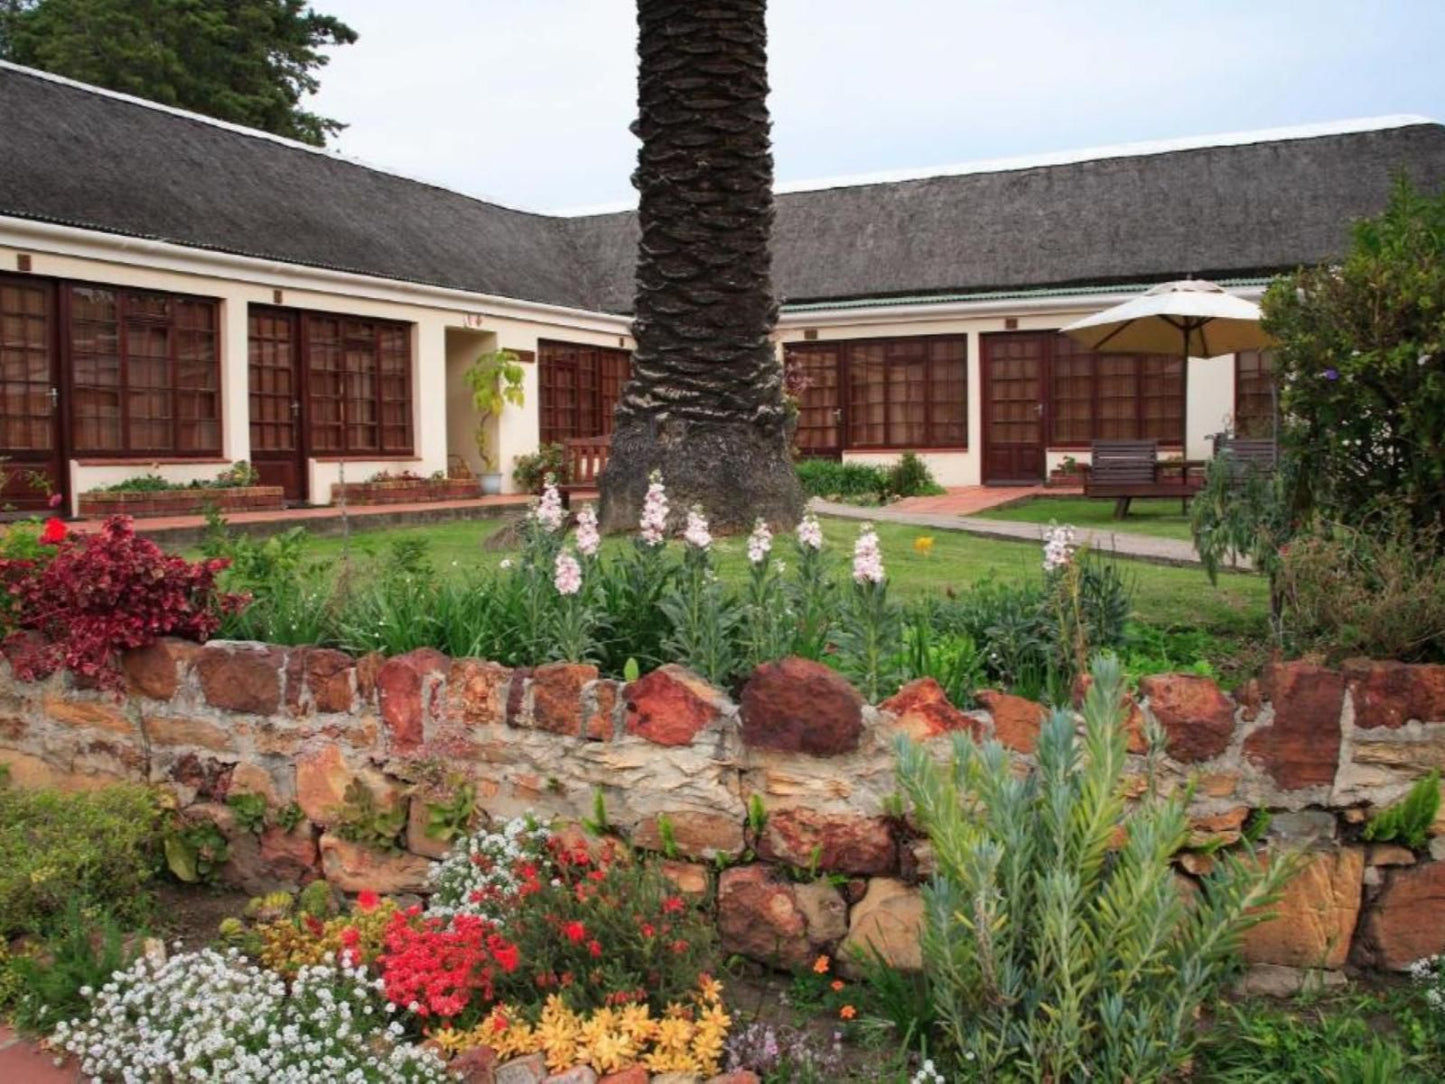 Eight Bells Mountain Inn Mossel Bay Western Cape South Africa House, Building, Architecture, Plant, Nature, Garden